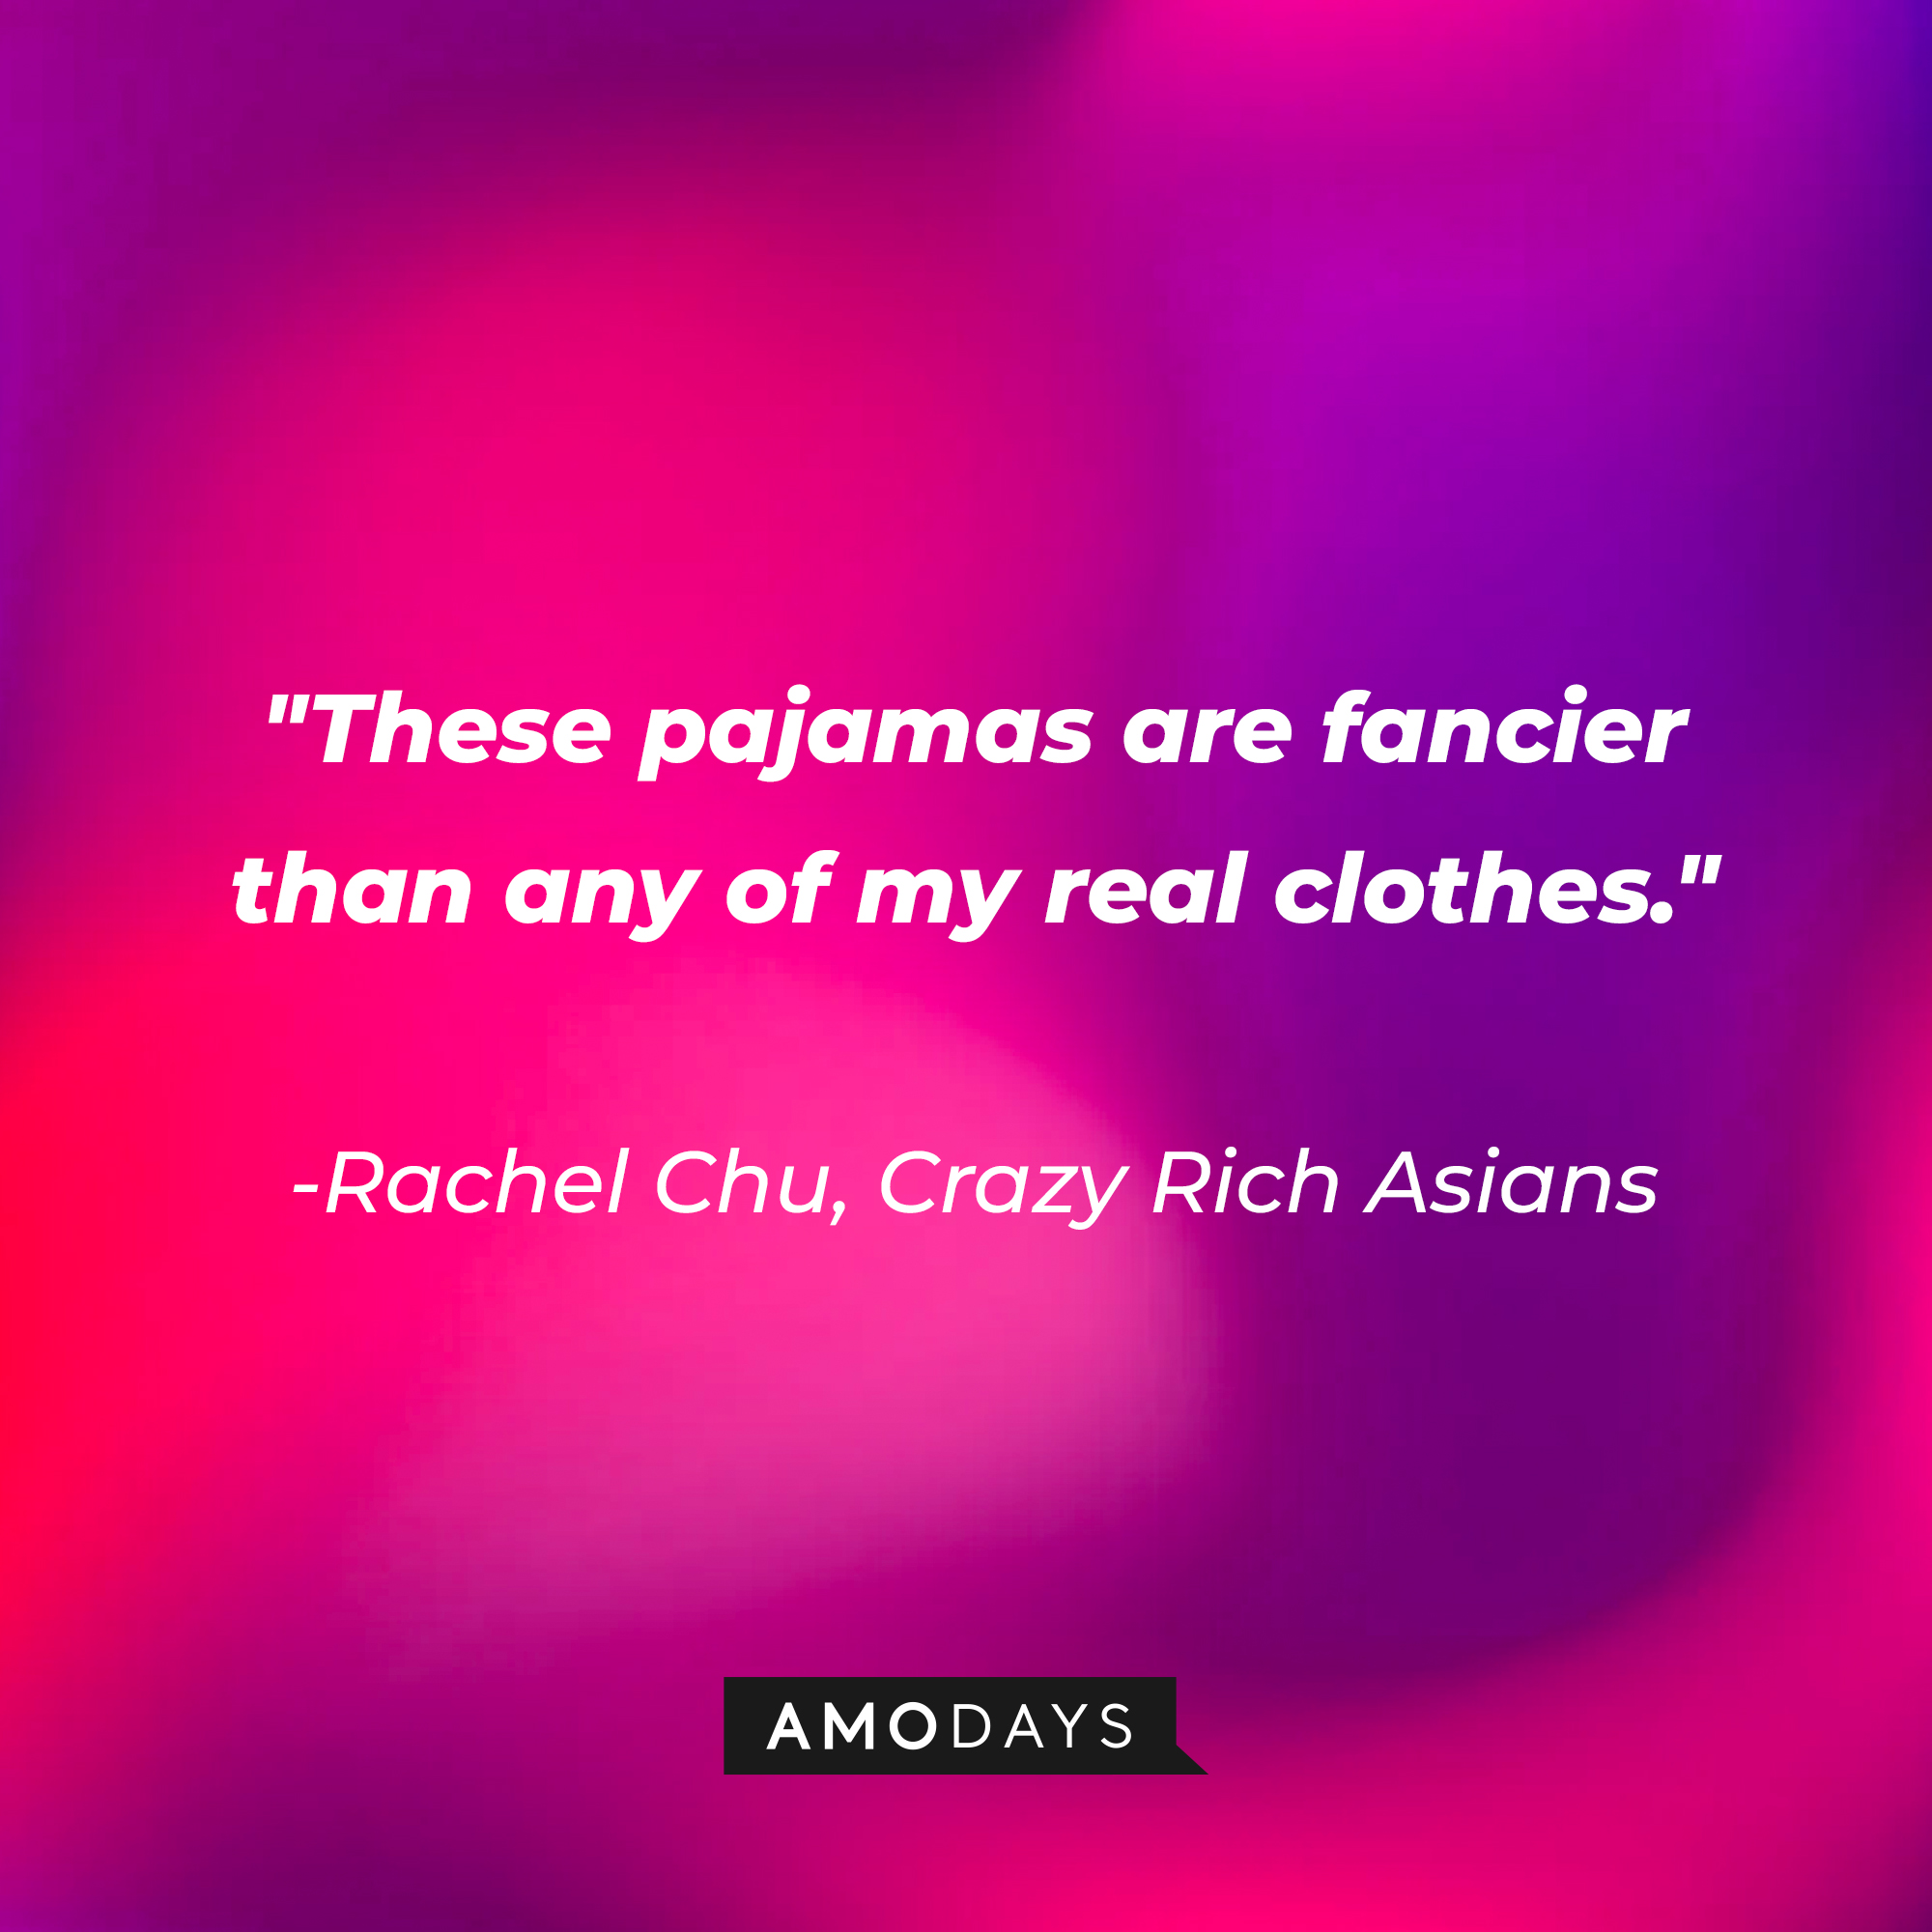 Rachel Chu's quote: "These pajamas are fancier than any of my real clothes." | Source: AmoDays